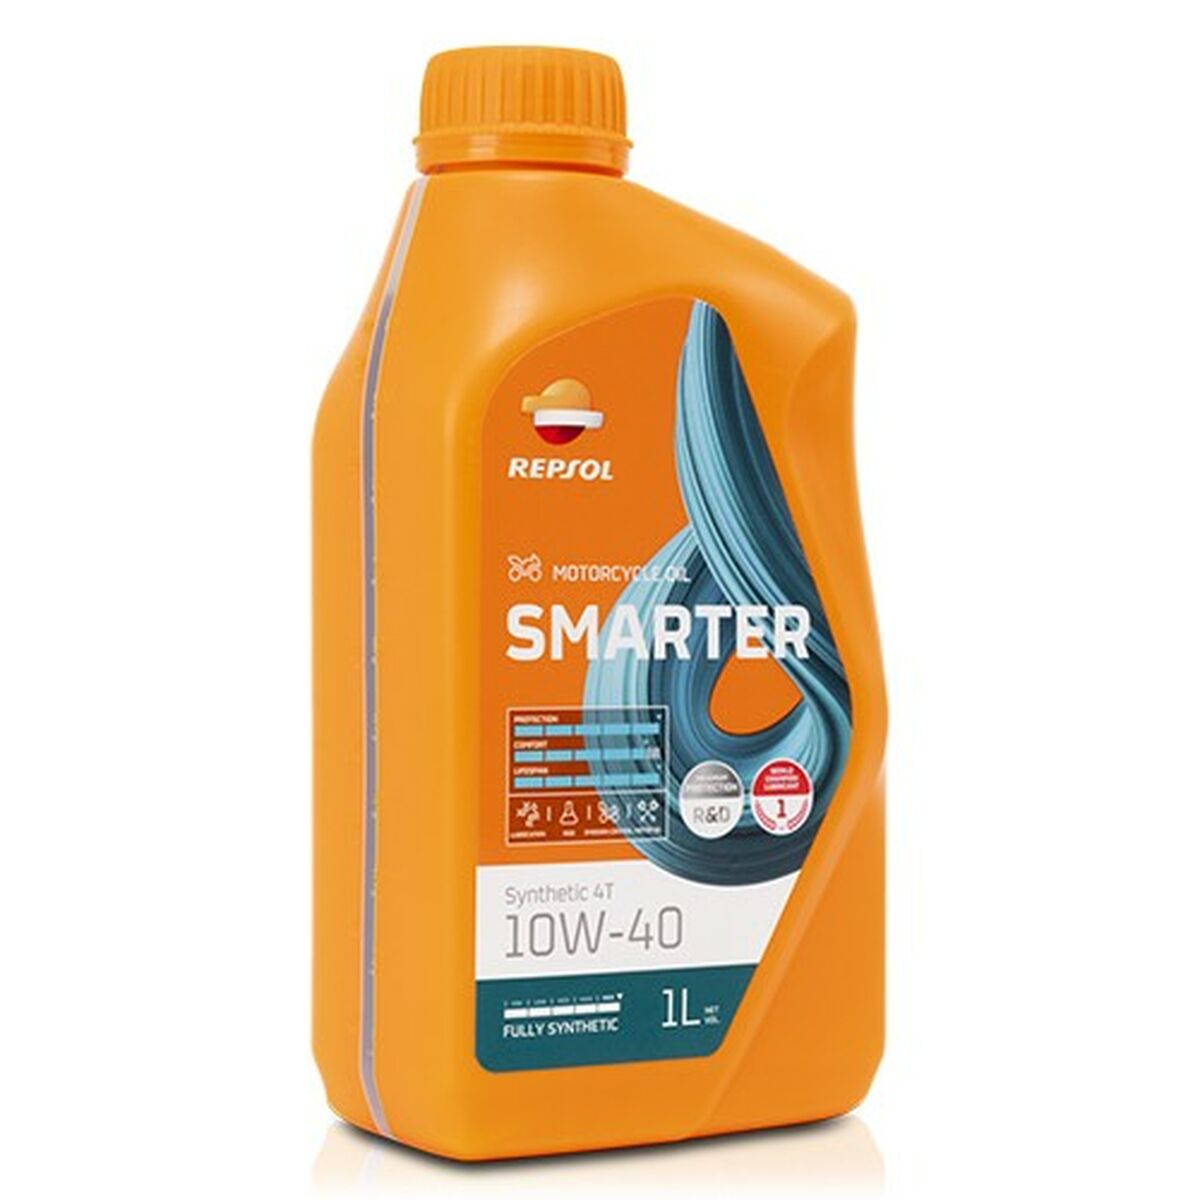 Motor Oil for Motorcycle Repsol Smarter 10W40 1 L